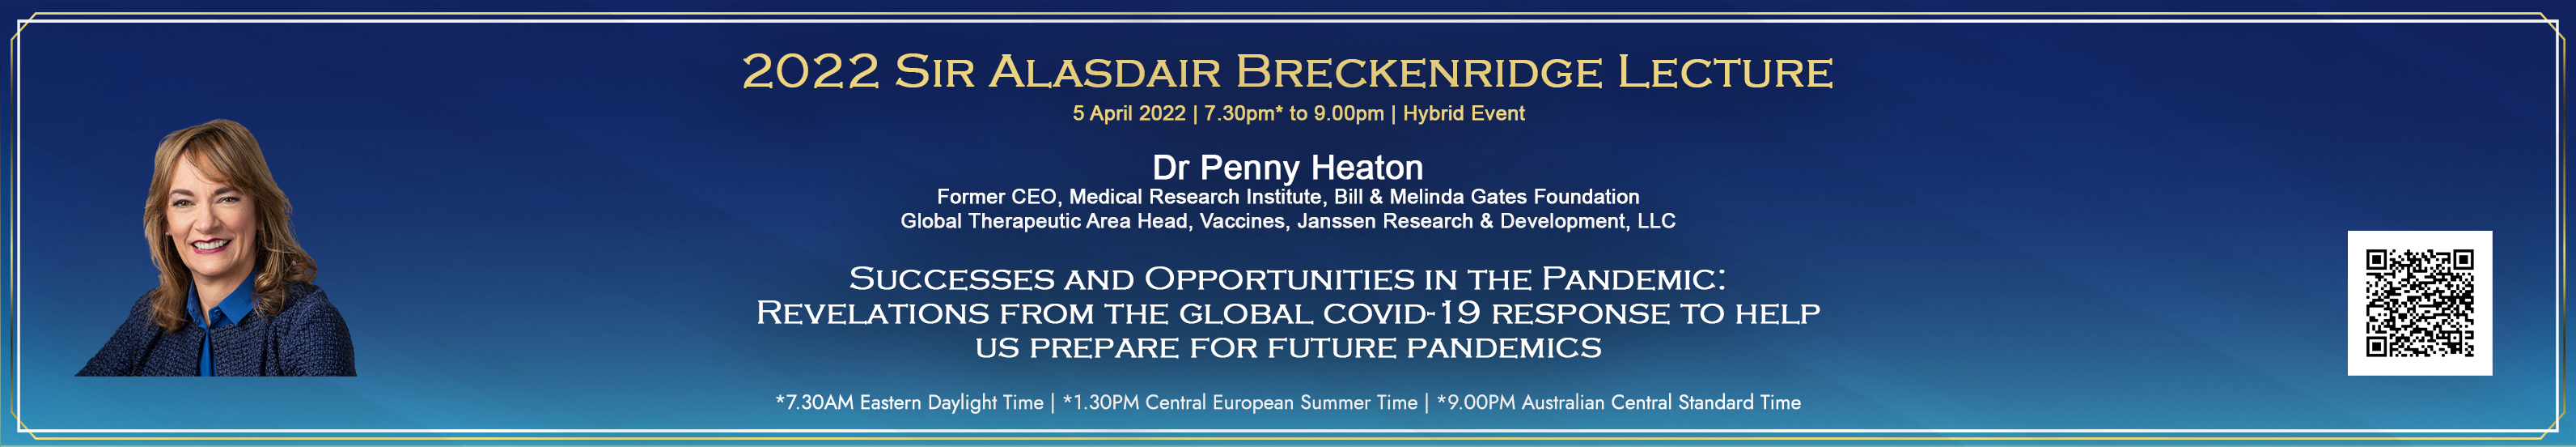 Sir Alasdair Breckenridge Lecture Banner with Dr Penny Heaton as the 2nd  Lecturer